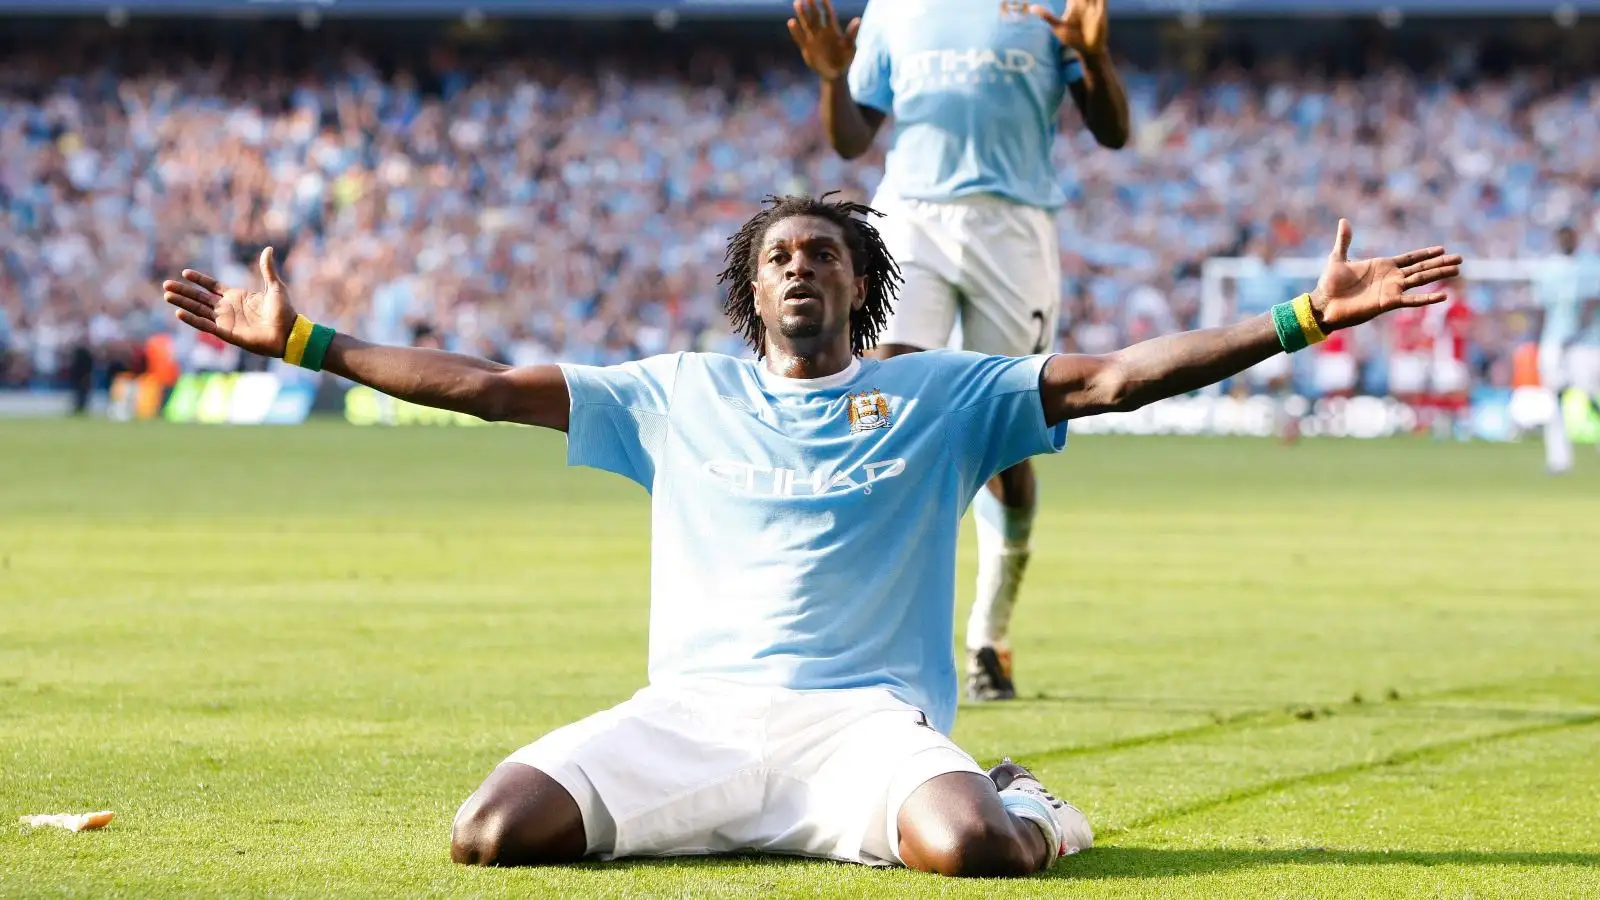 ‘It’s behind me now’ – Adebayor tells Arsenal fans to ‘forget’ about his iconic goal celebration